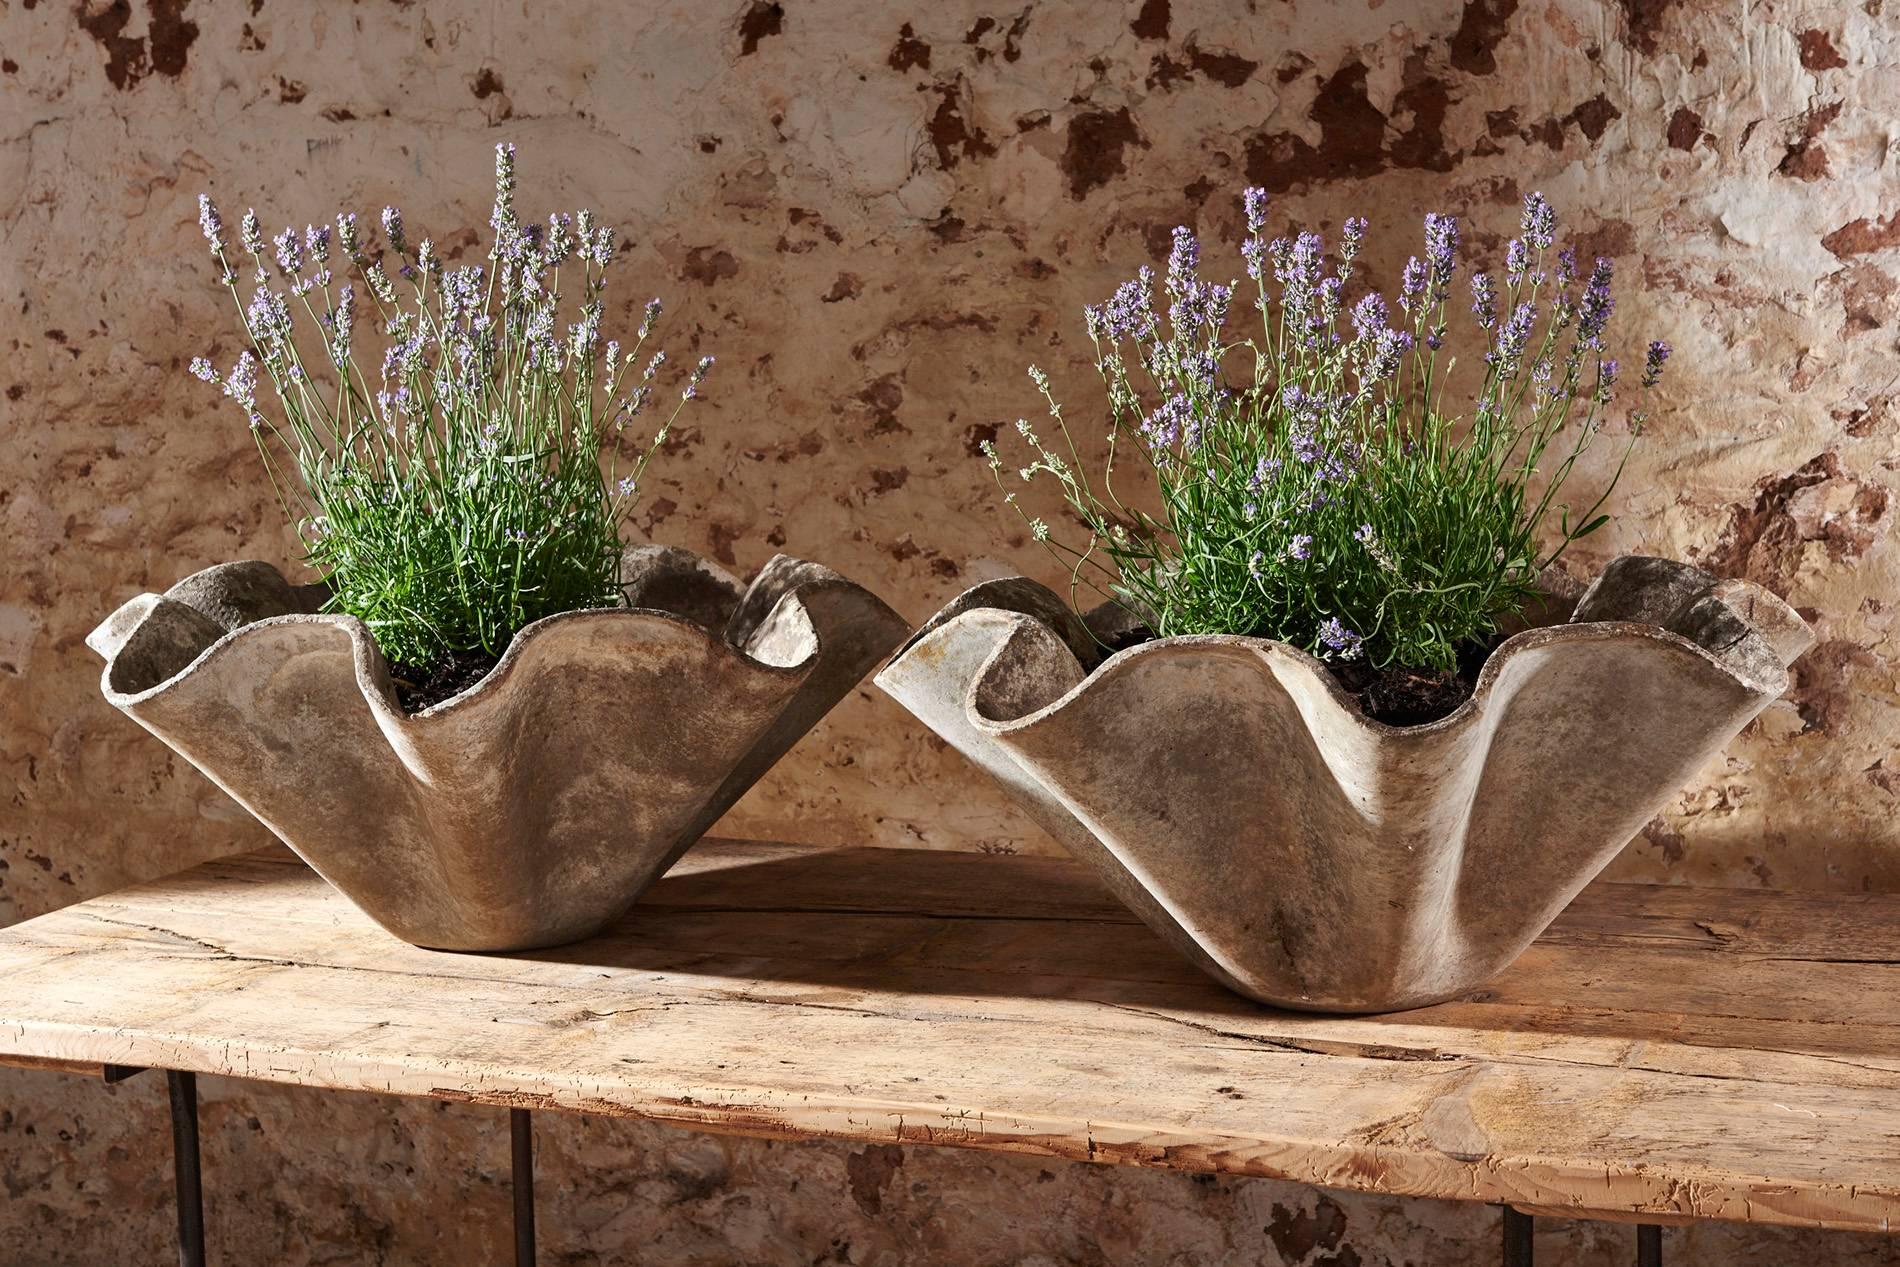 Cast Pair of Willy Handkerchief Planters